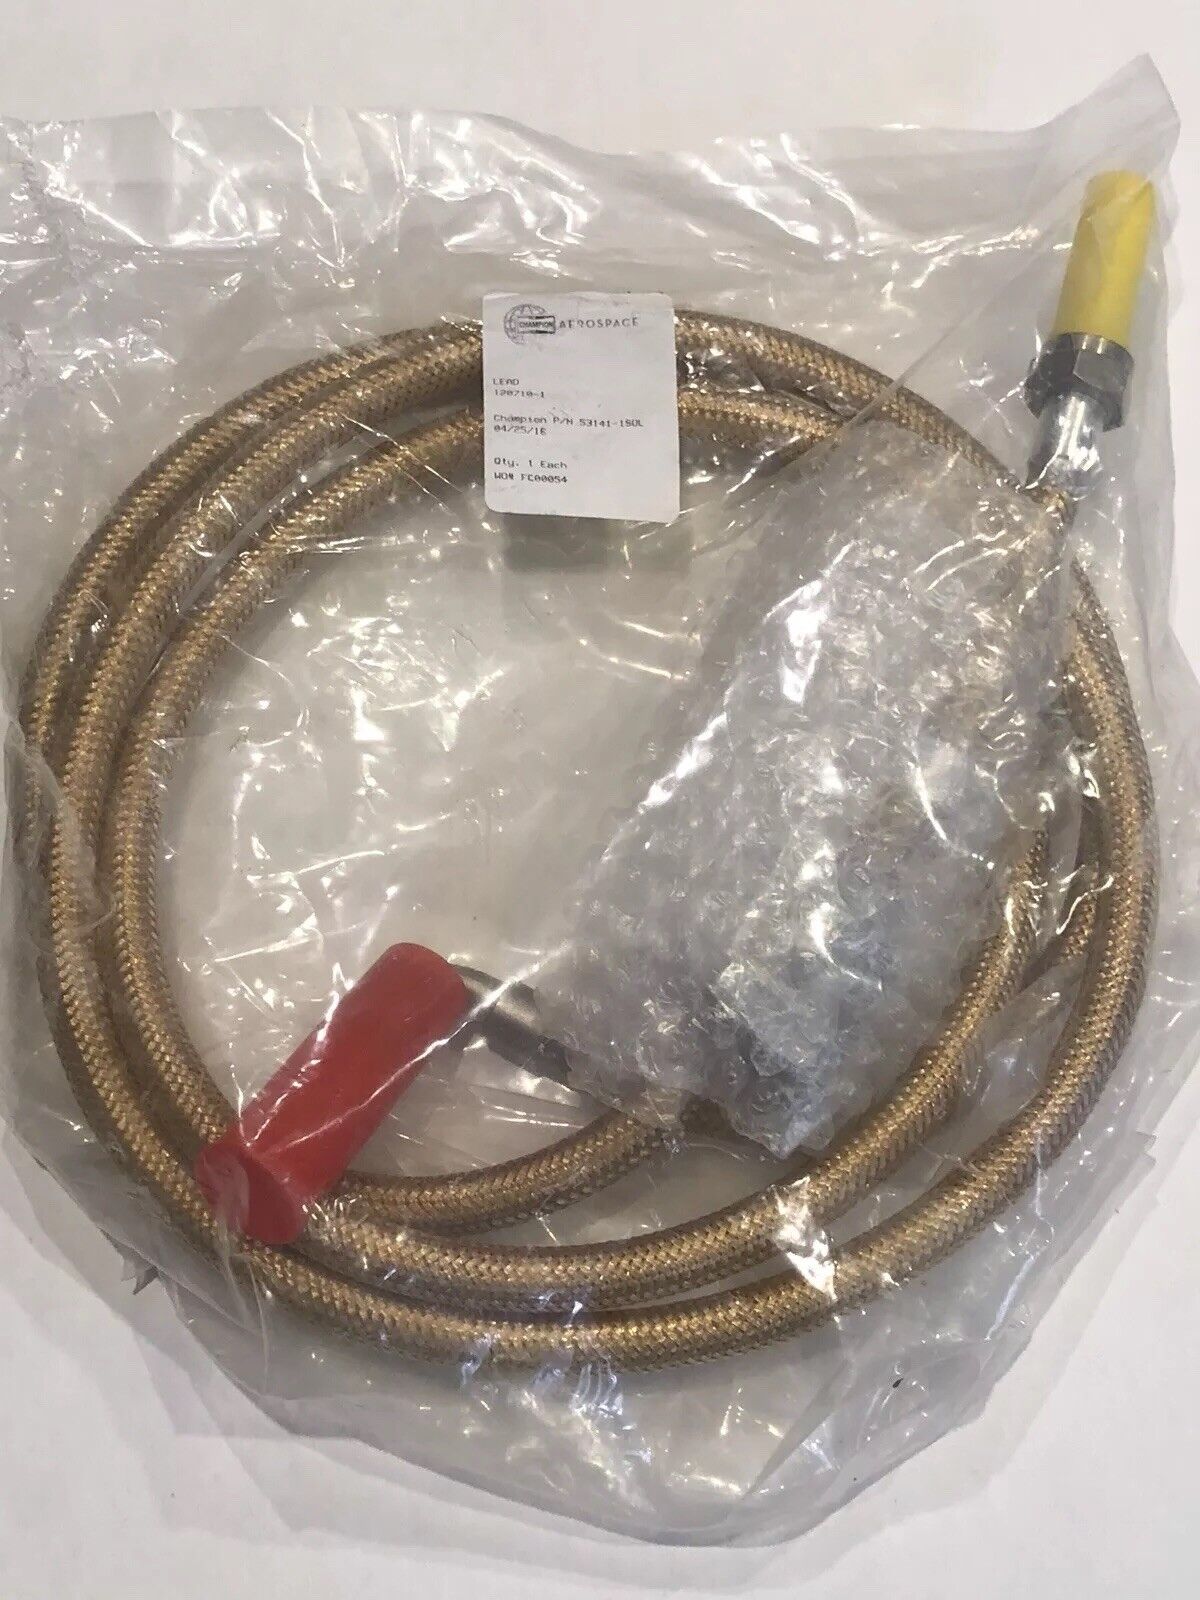 NEW GENUINE OEM CHAMPION AEROSPACE 53141-1 LEAD IGNITION CABLE 120710-1